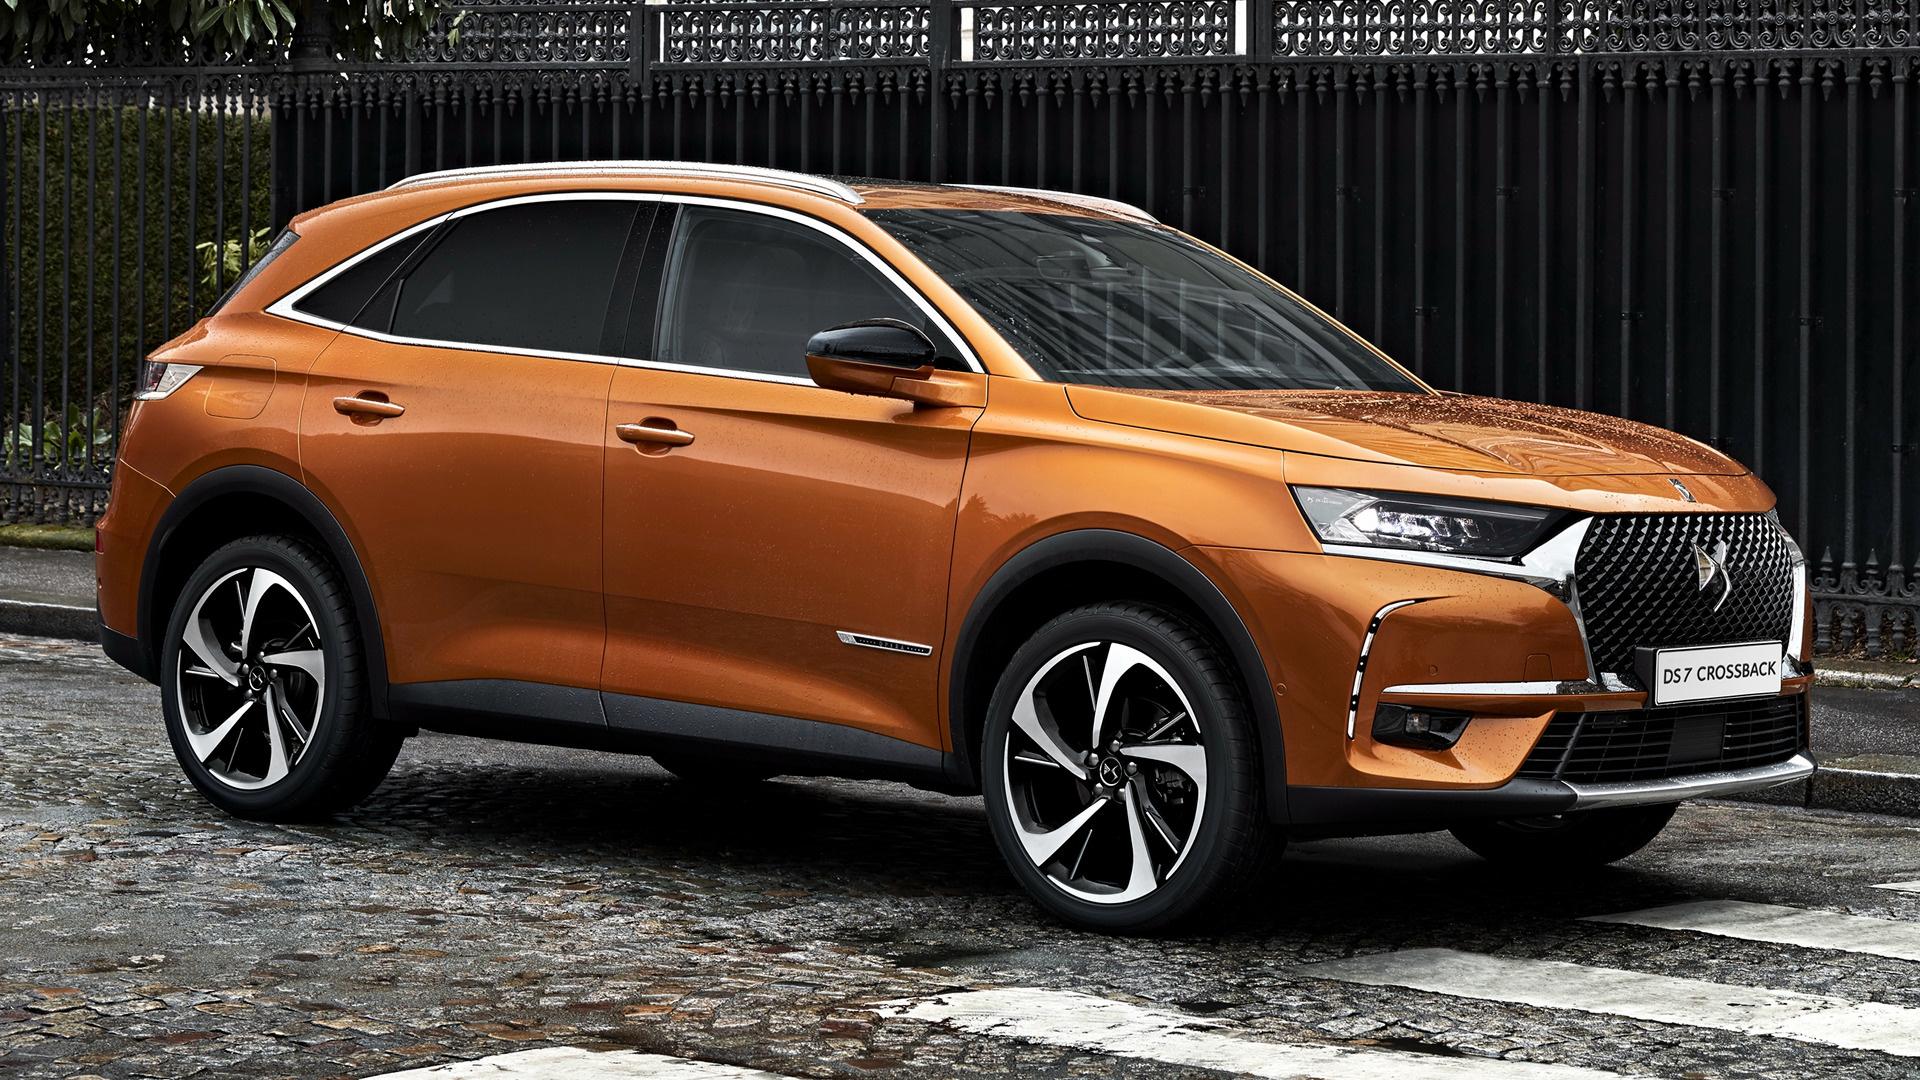 DS 7 Crossback and HD Image